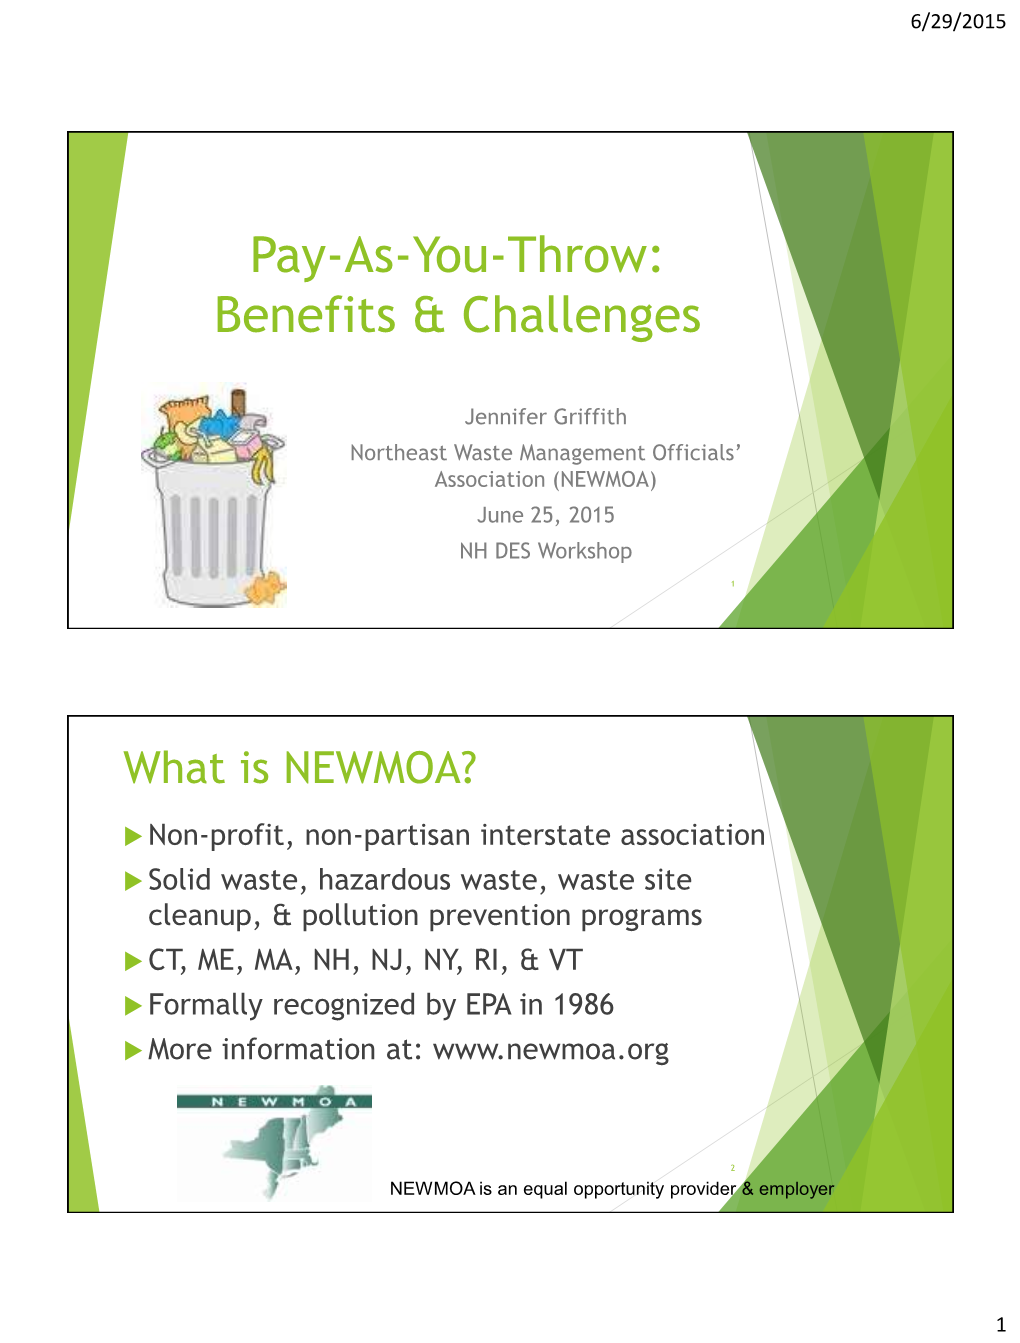 Pay-As-You-Throw: Benefits & Challenges